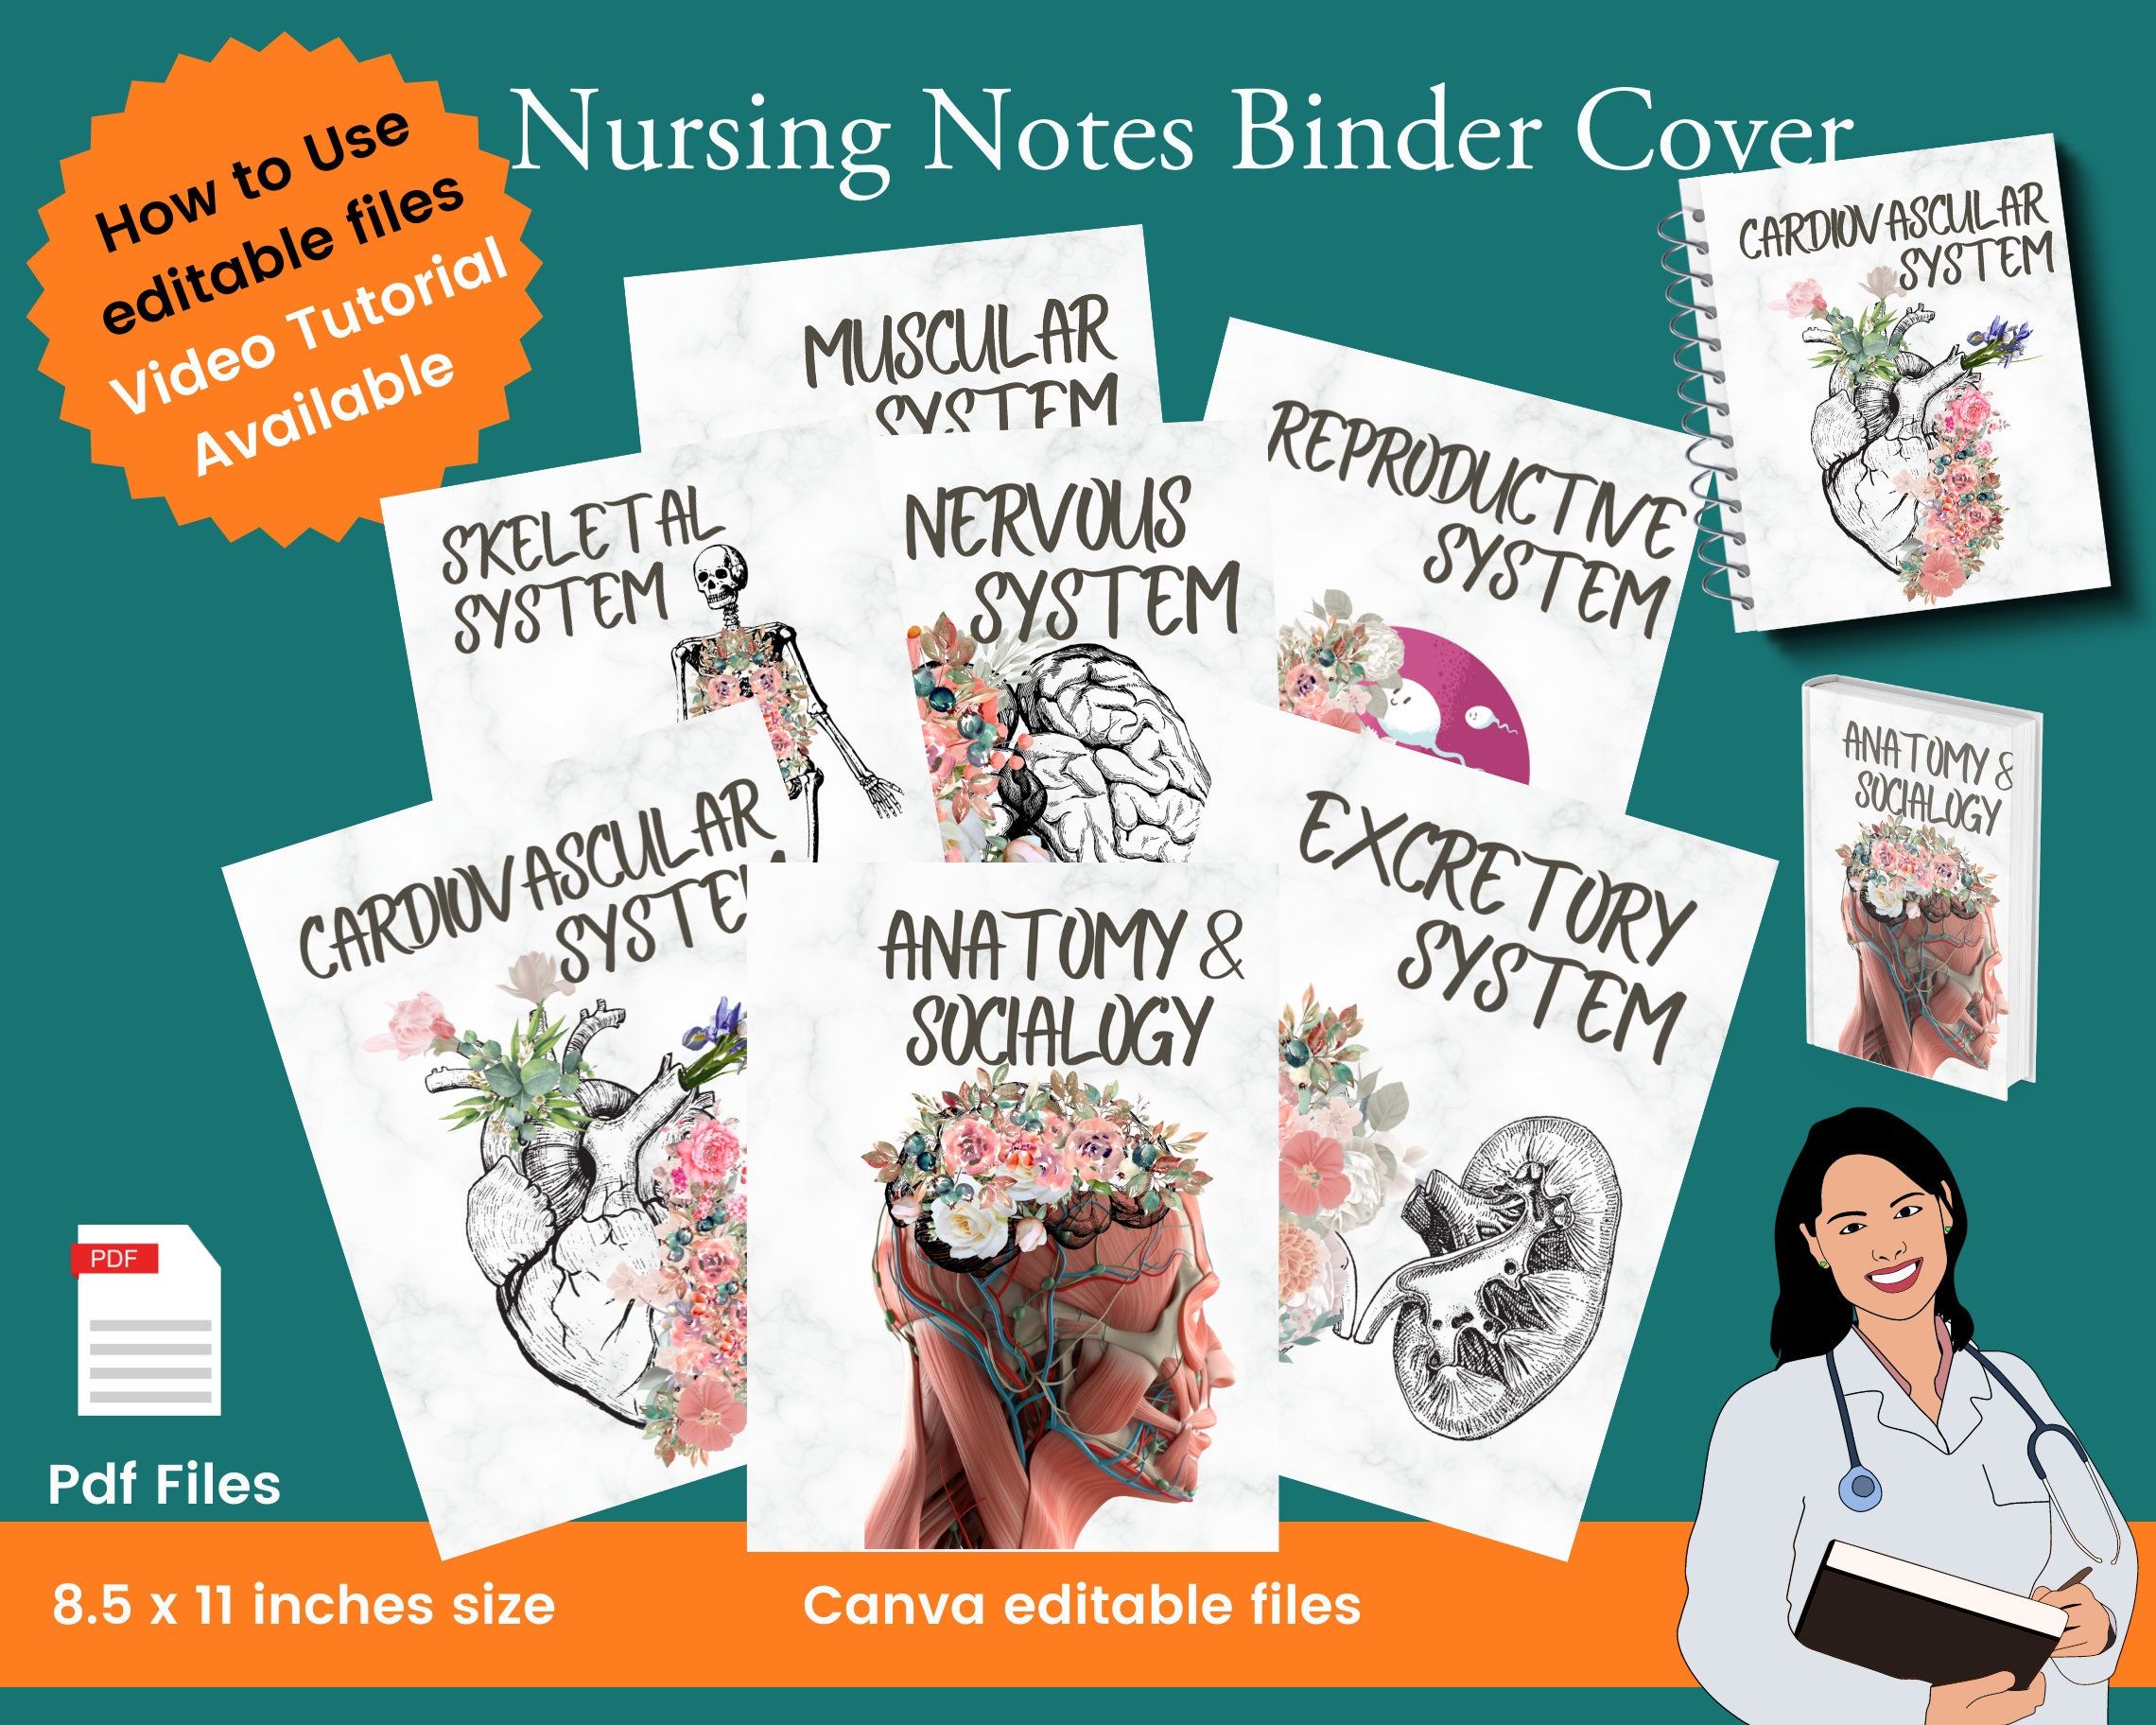 Nursing Notes Binder Cover Medical Student Anatomy And Physiology